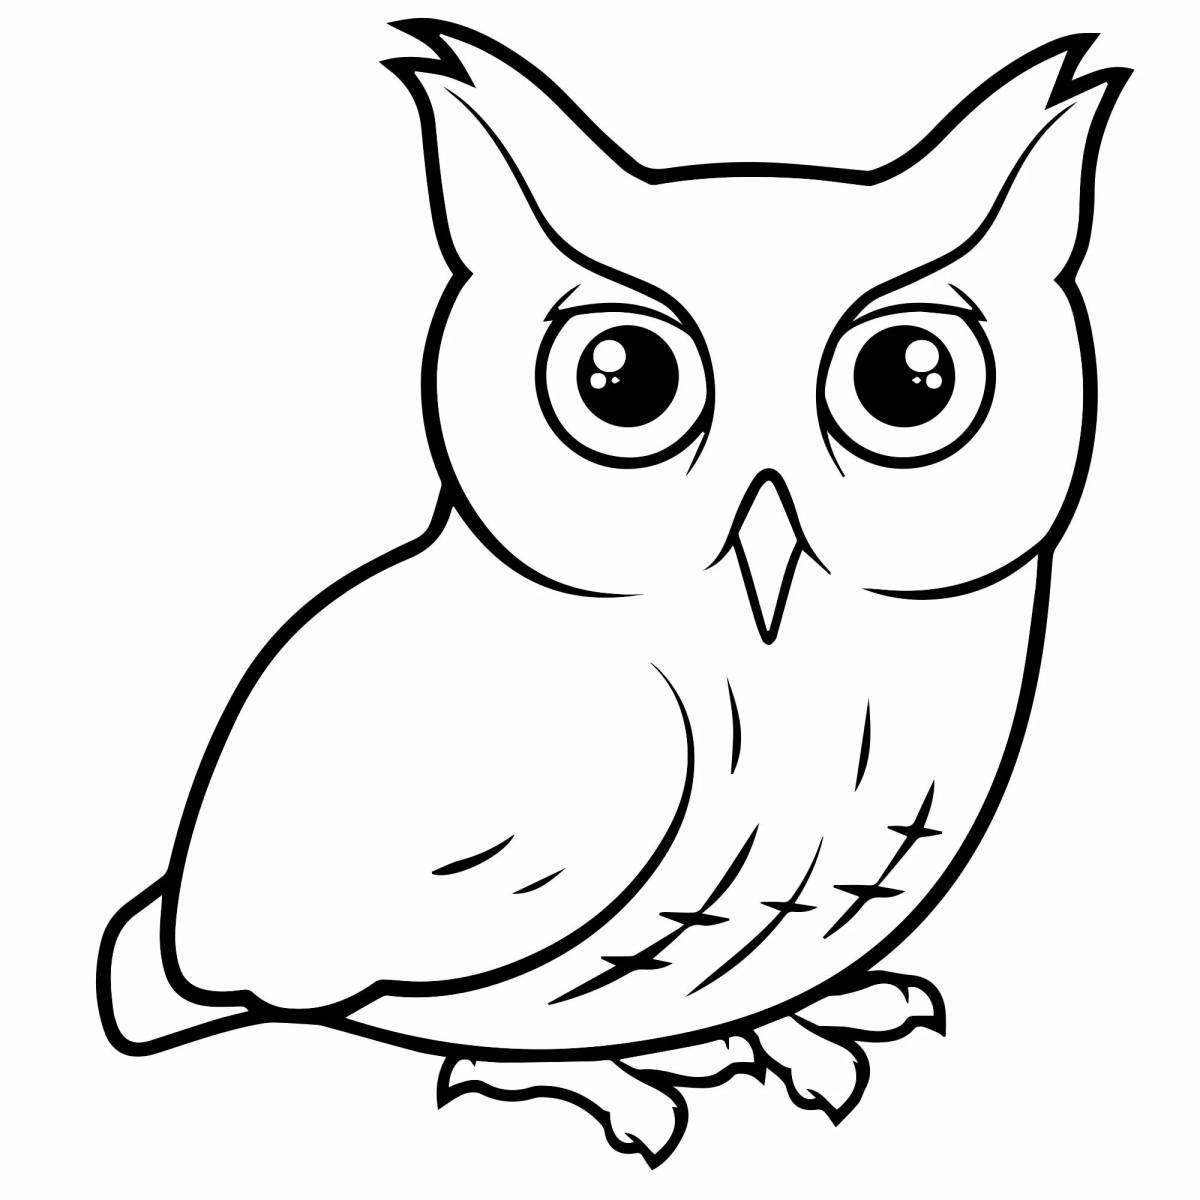 Coloring mystical long-eared owl